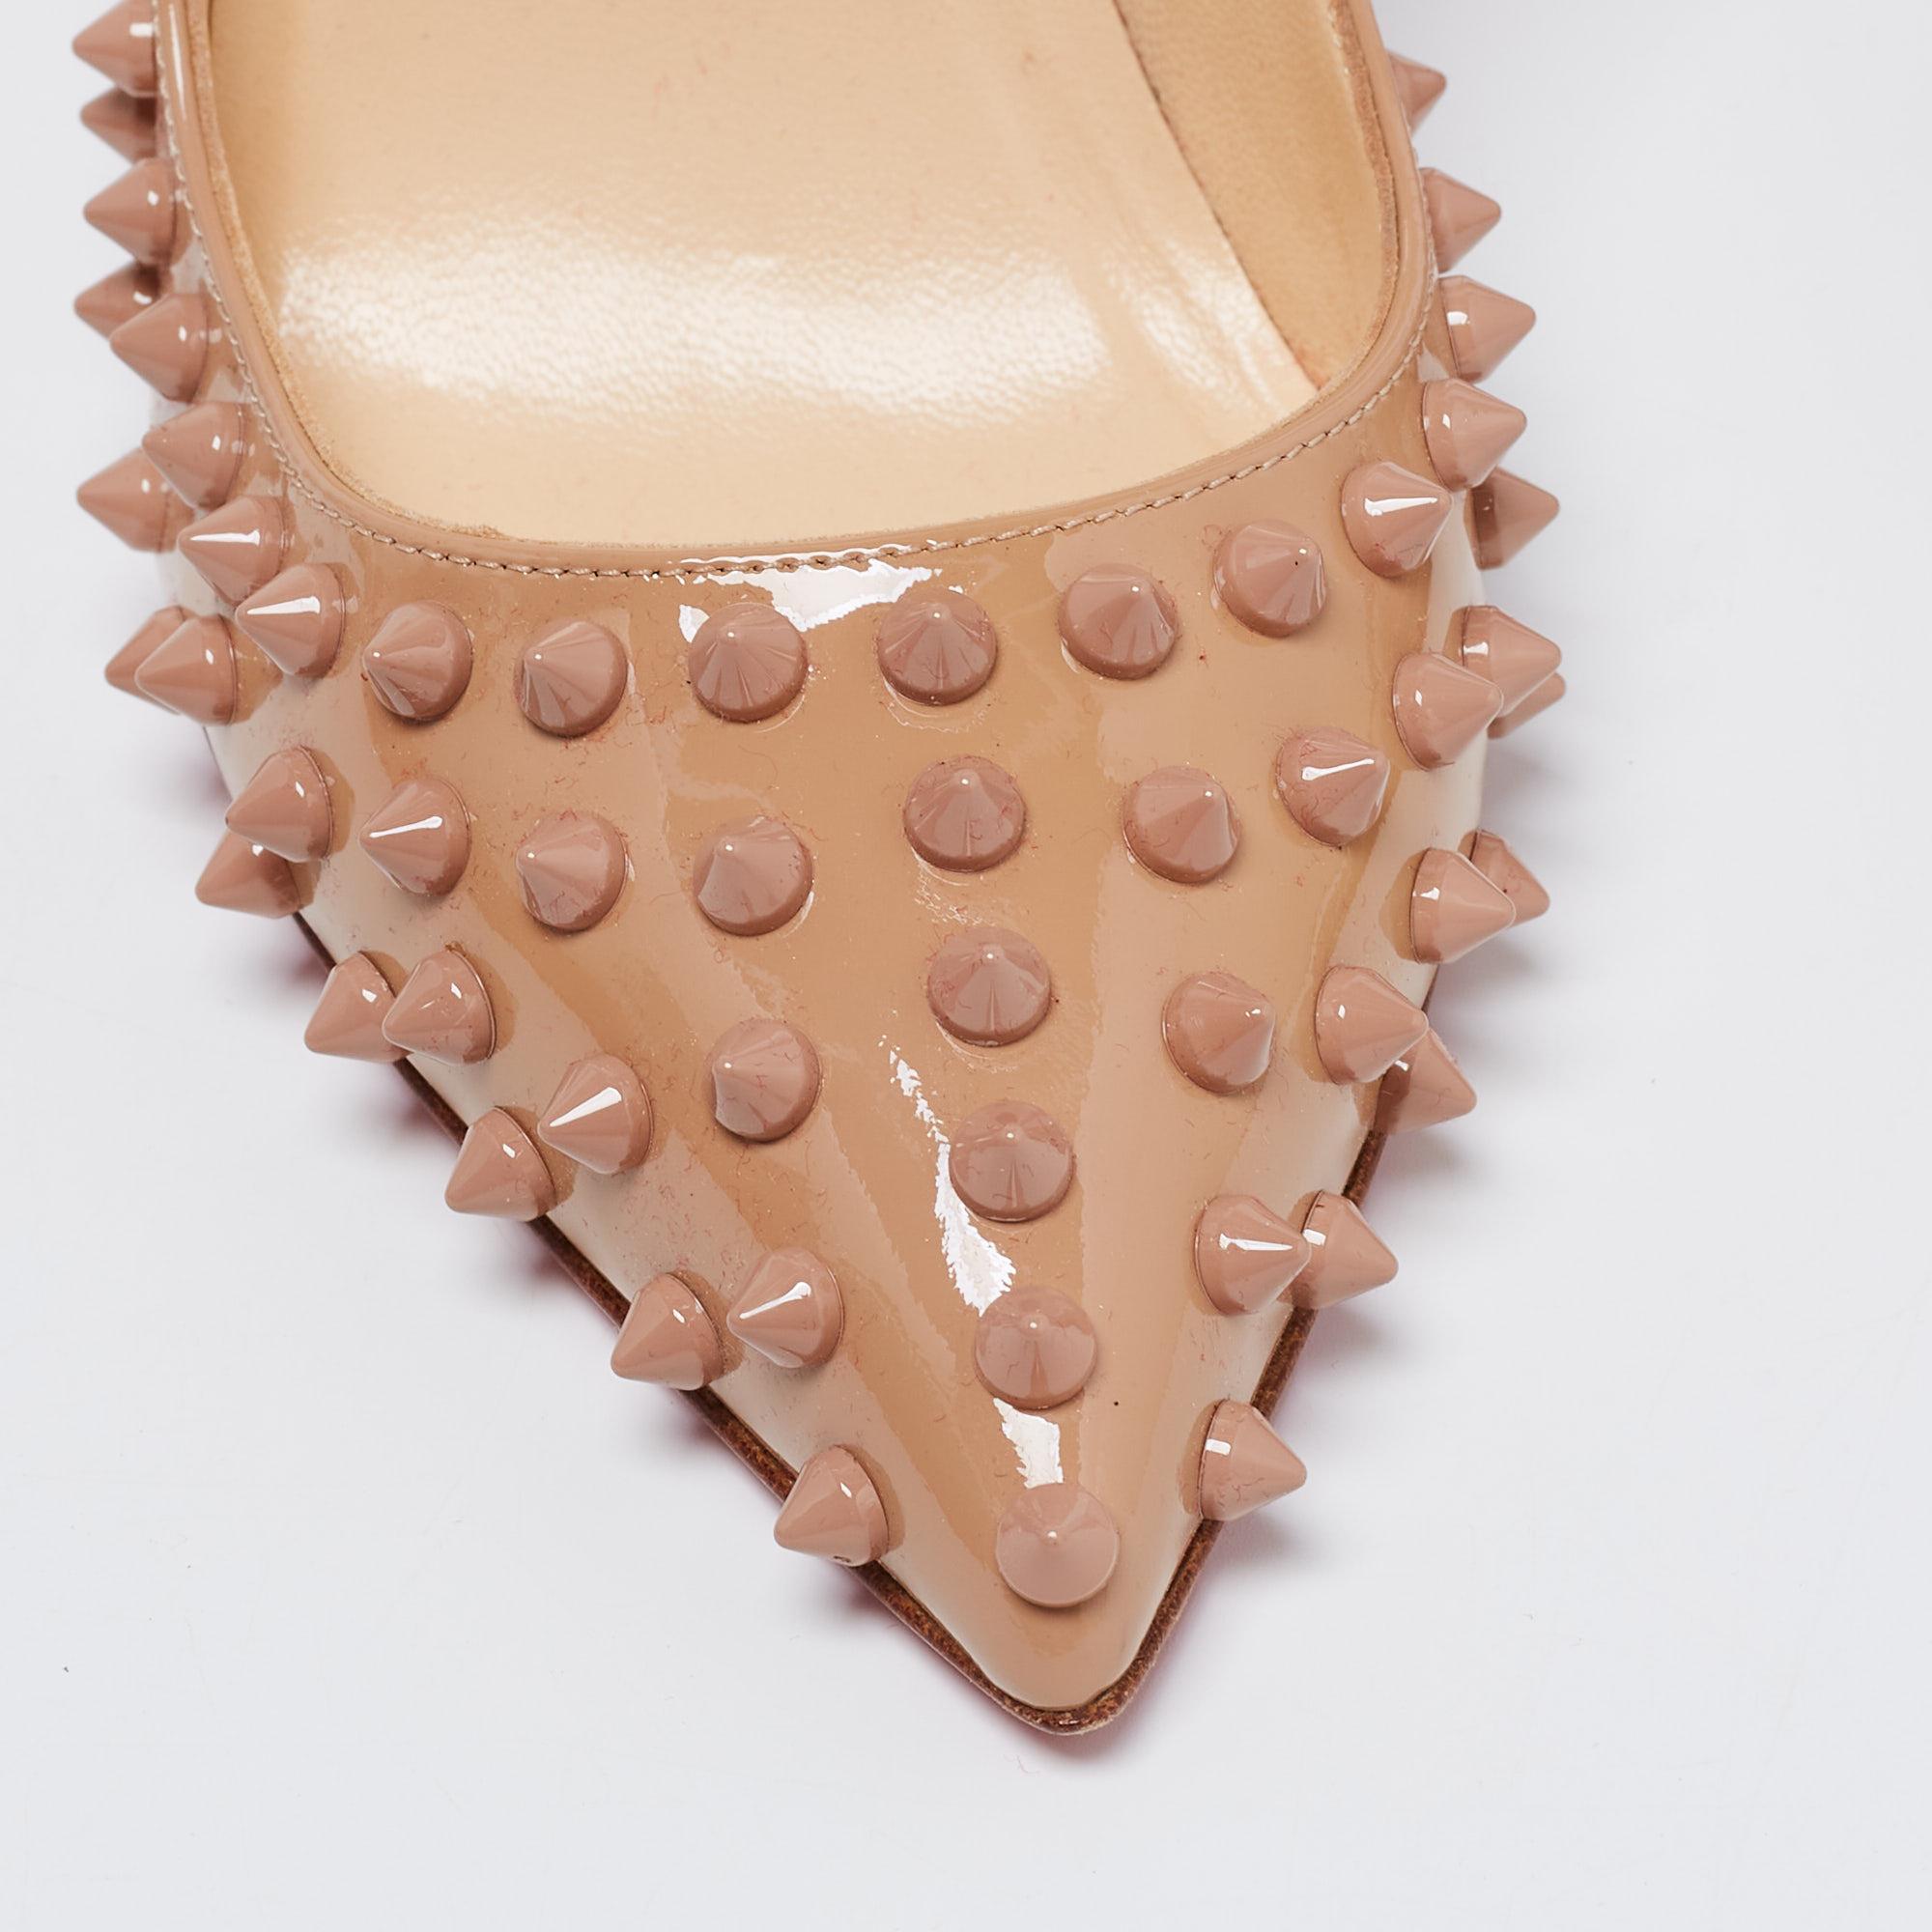 Christian Louboutin Beige Patent Leather Pigalle Spikes Pumps Size 38 1